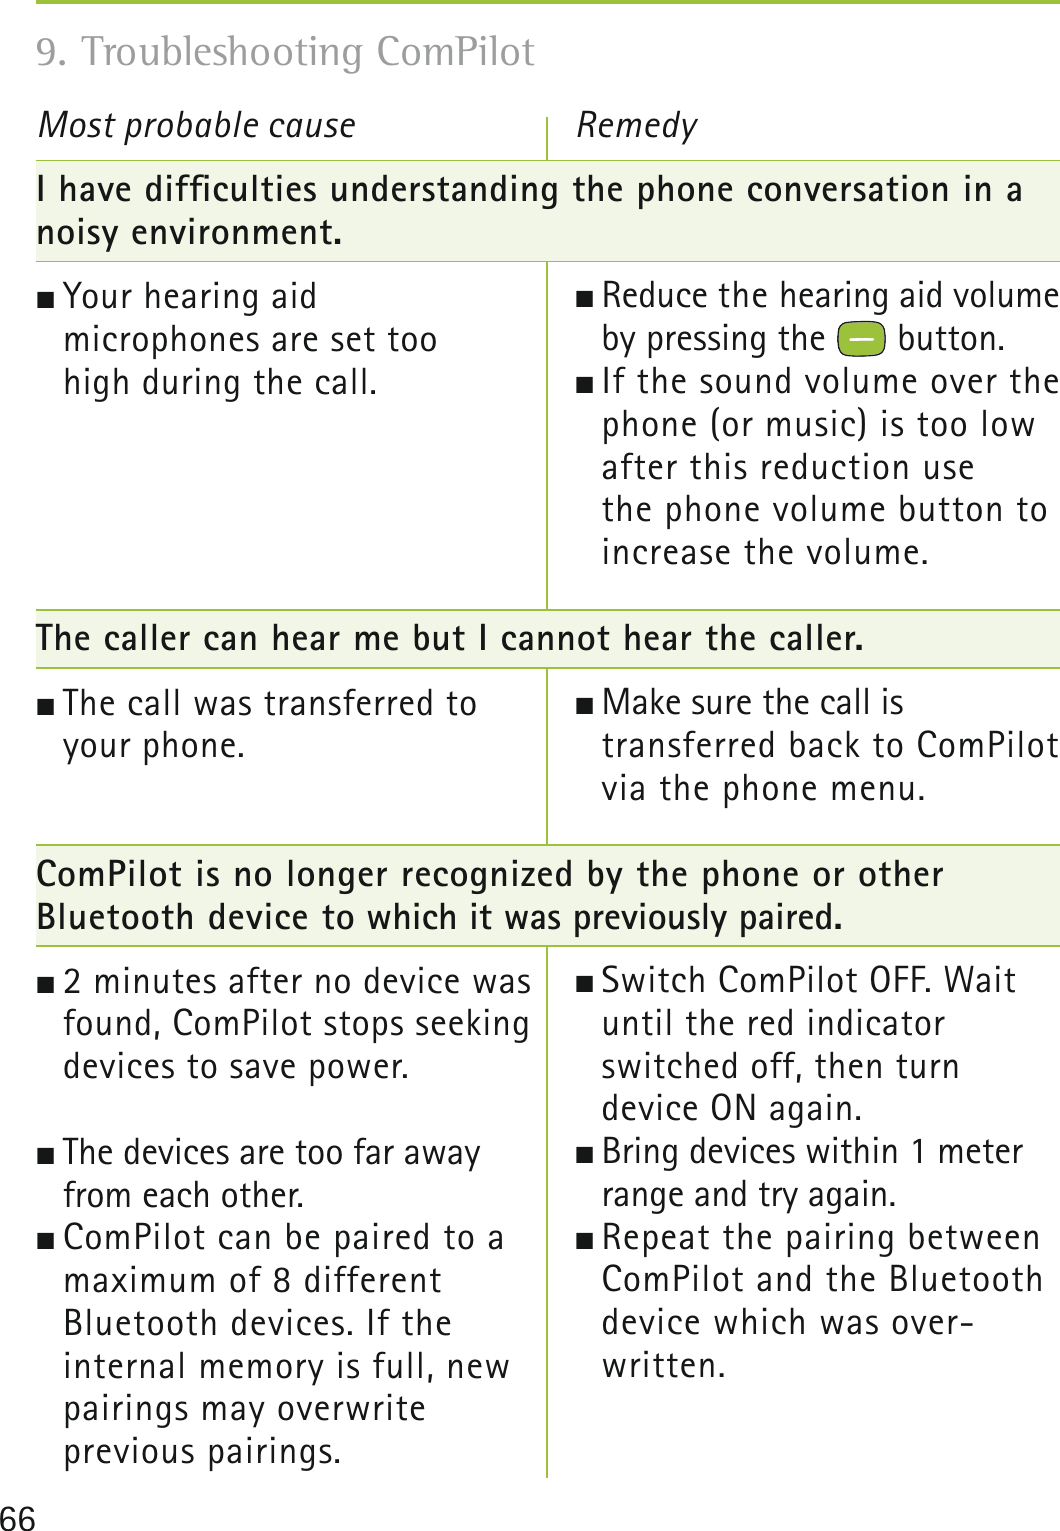 66Most probable cause Remedy9. Troubleshooting ComPilot I have difﬁculties understanding the phone conversation in a noisy environment. Your hearing aid  microphones are set too  high during the call.  The caller can hear me but I cannot hear the caller. The call was transferred to  your phone.ComPilot is no longer recognized by the phone or other  Bluetooth device to which it was previously paired. 2 minutes after no device was found, ComPilot stops seeking devices to save power.  The devices are too far away  from each other. ComPilot can be paired to a maximum of 8 different  Bluetooth devices. If the  internal memory is full, new pairings may overwrite  previous pairings.  Reduce the hearing aid volume by pressing the   button. If the sound volume over the phone (or music) is too low after this reduction use  the phone volume button to increase the volume. Make sure the call is  transferred back to ComPilot via the phone menu. Switch ComPilot OFF. Wait until the red indicator  switched off, then turn  device ON again.  Bring devices within 1 meter range and try again. Repeat the pairing between ComPilot and the Bluetooth device which was over- written.